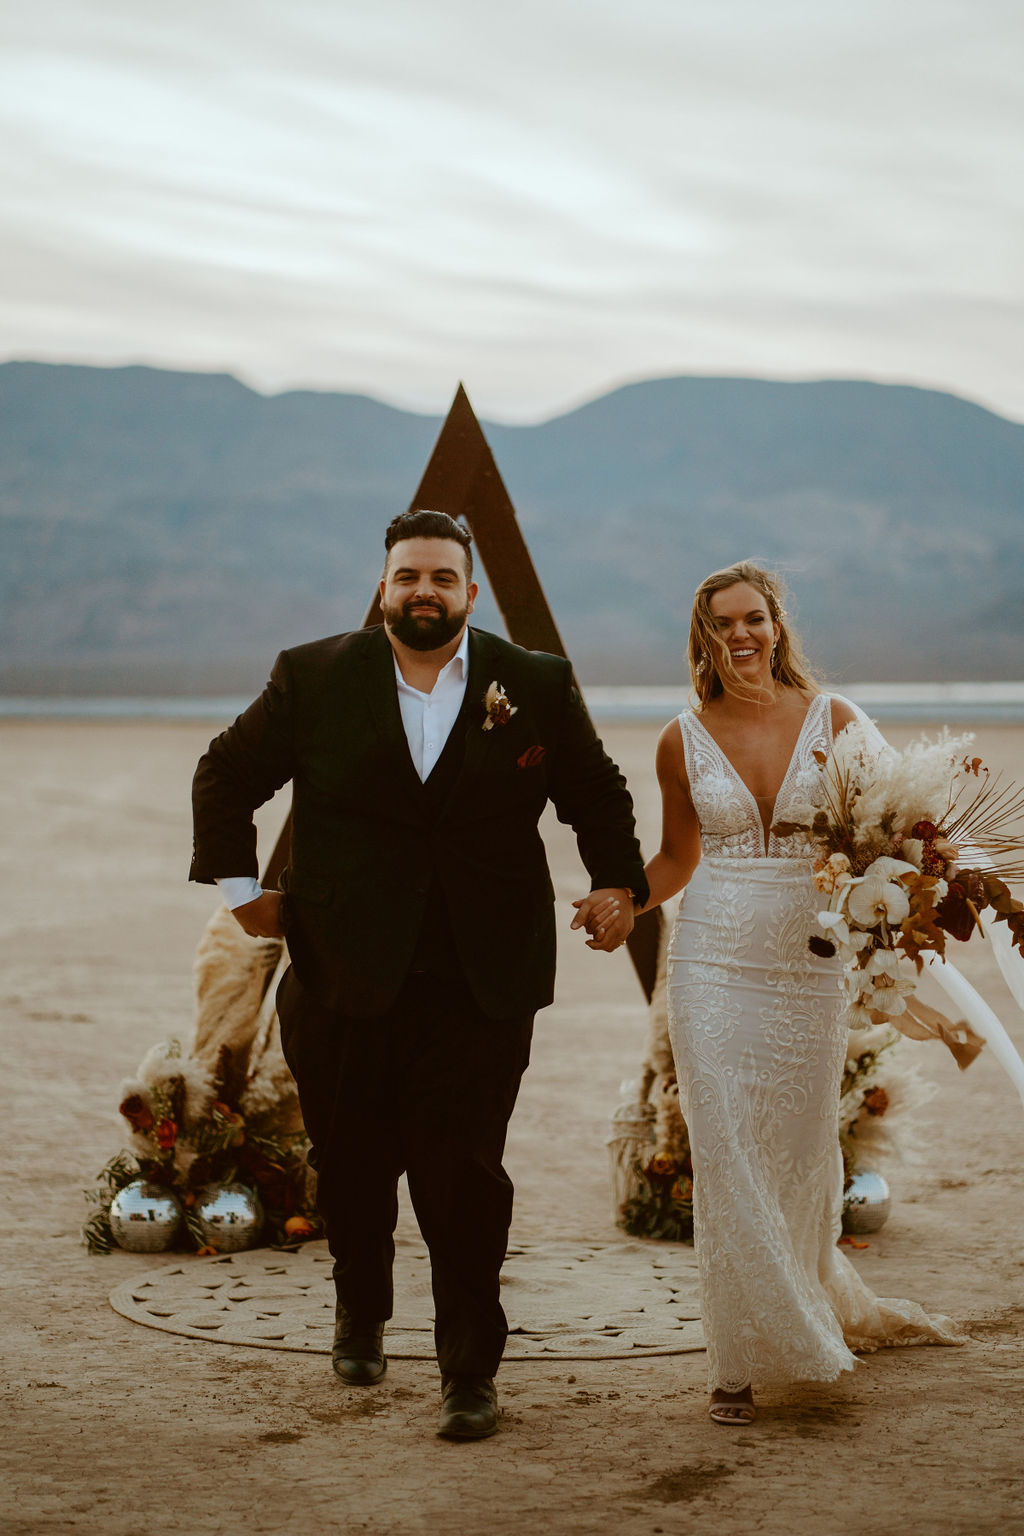 Newlyweds Exiting Ceremony on Las Vegas Dry Lake Bed 